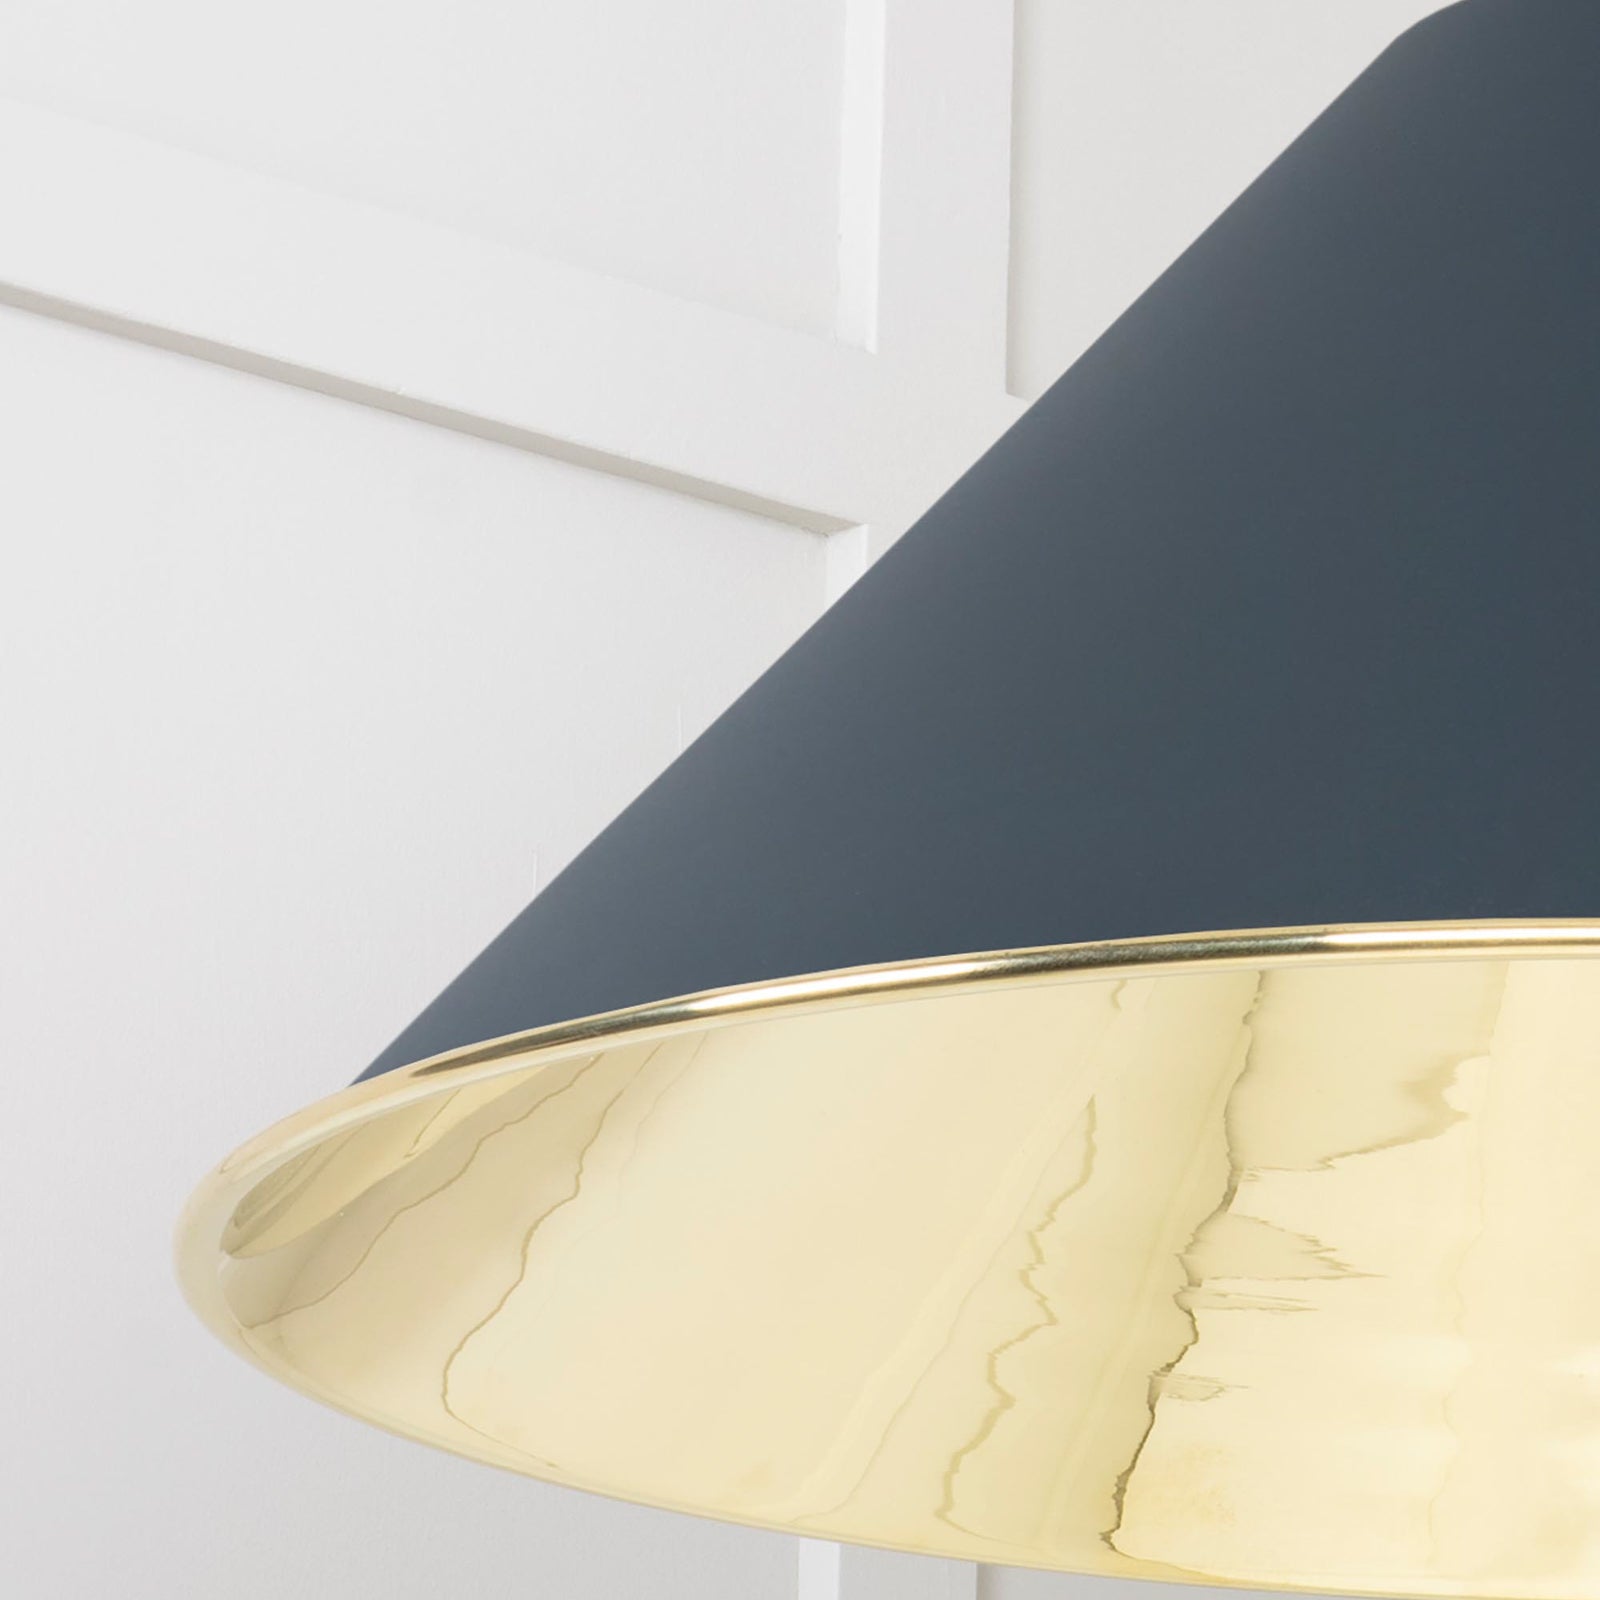 SHOW Close Up Image of Hockley Ceiling Light in Soot